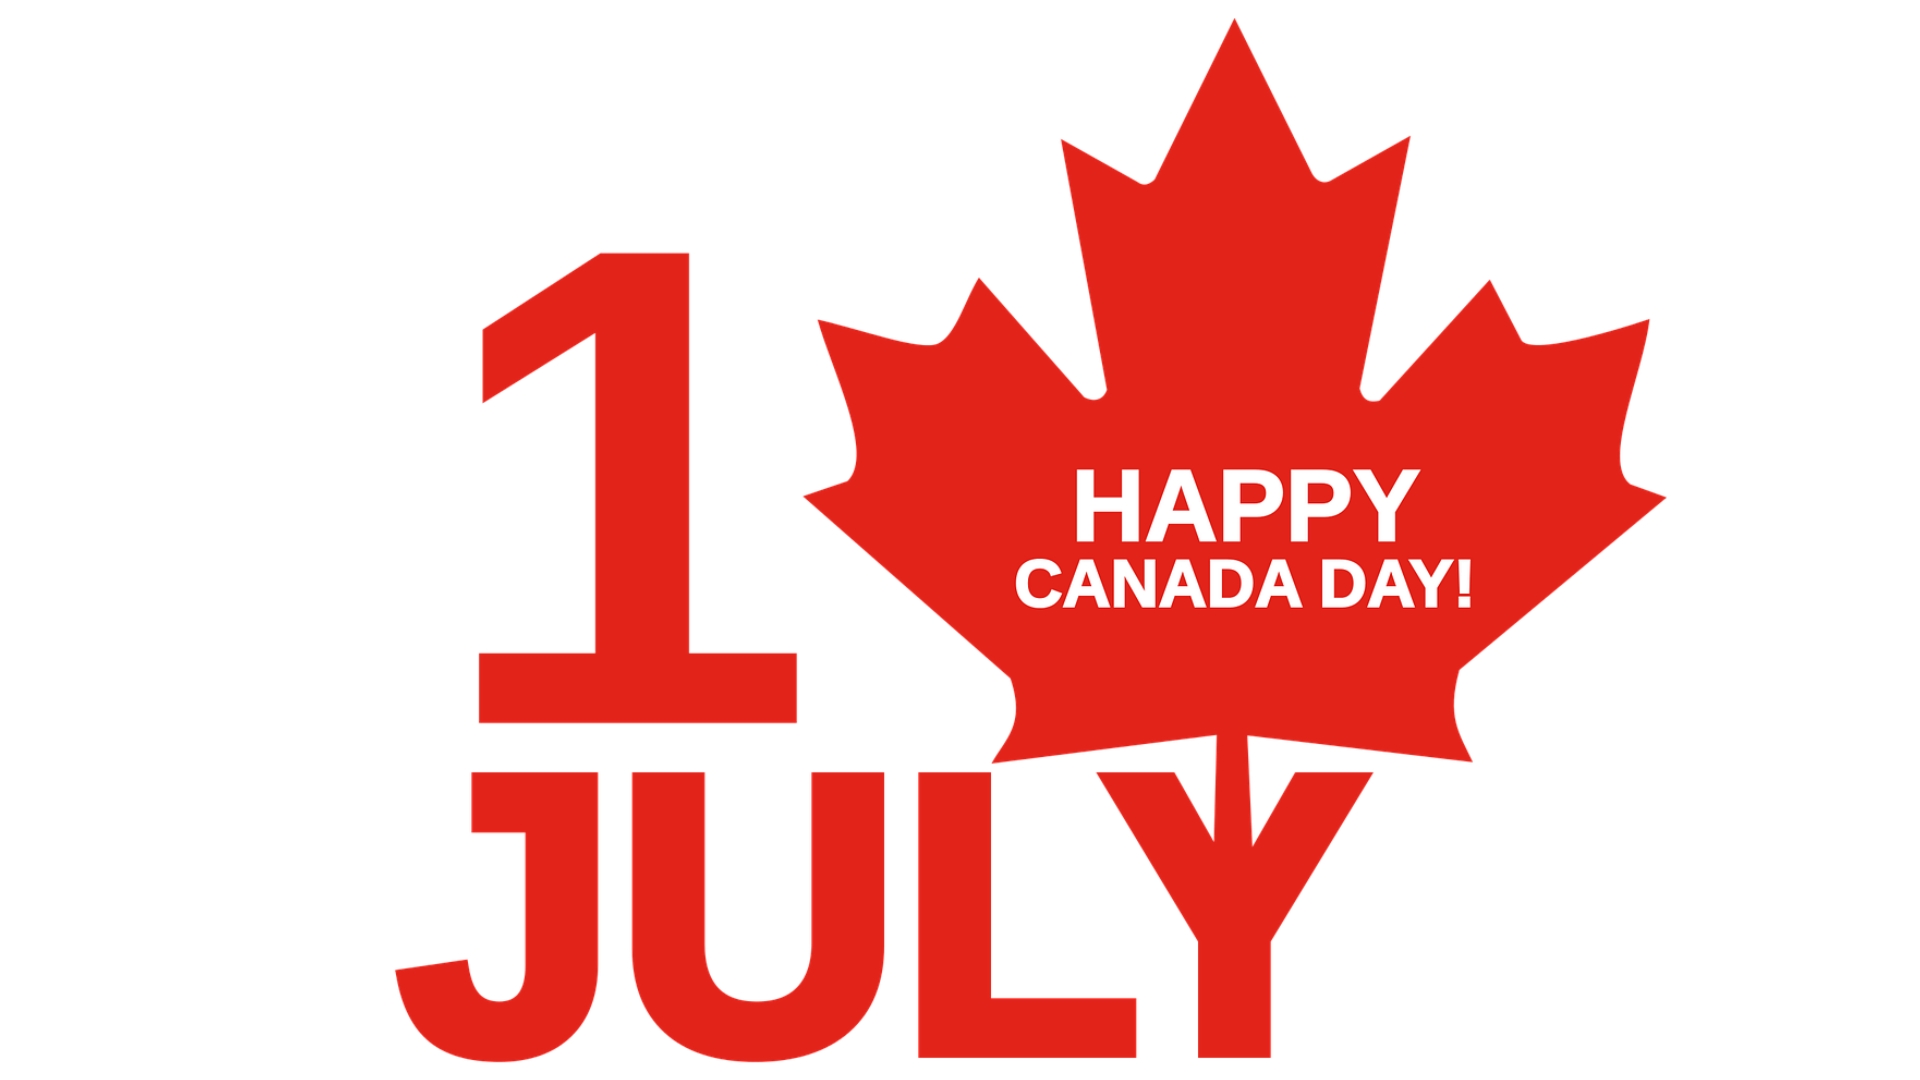 Happy Canada Day Images And Hd Wallpapers With Quotes For Free Download Online Wish Canada Day